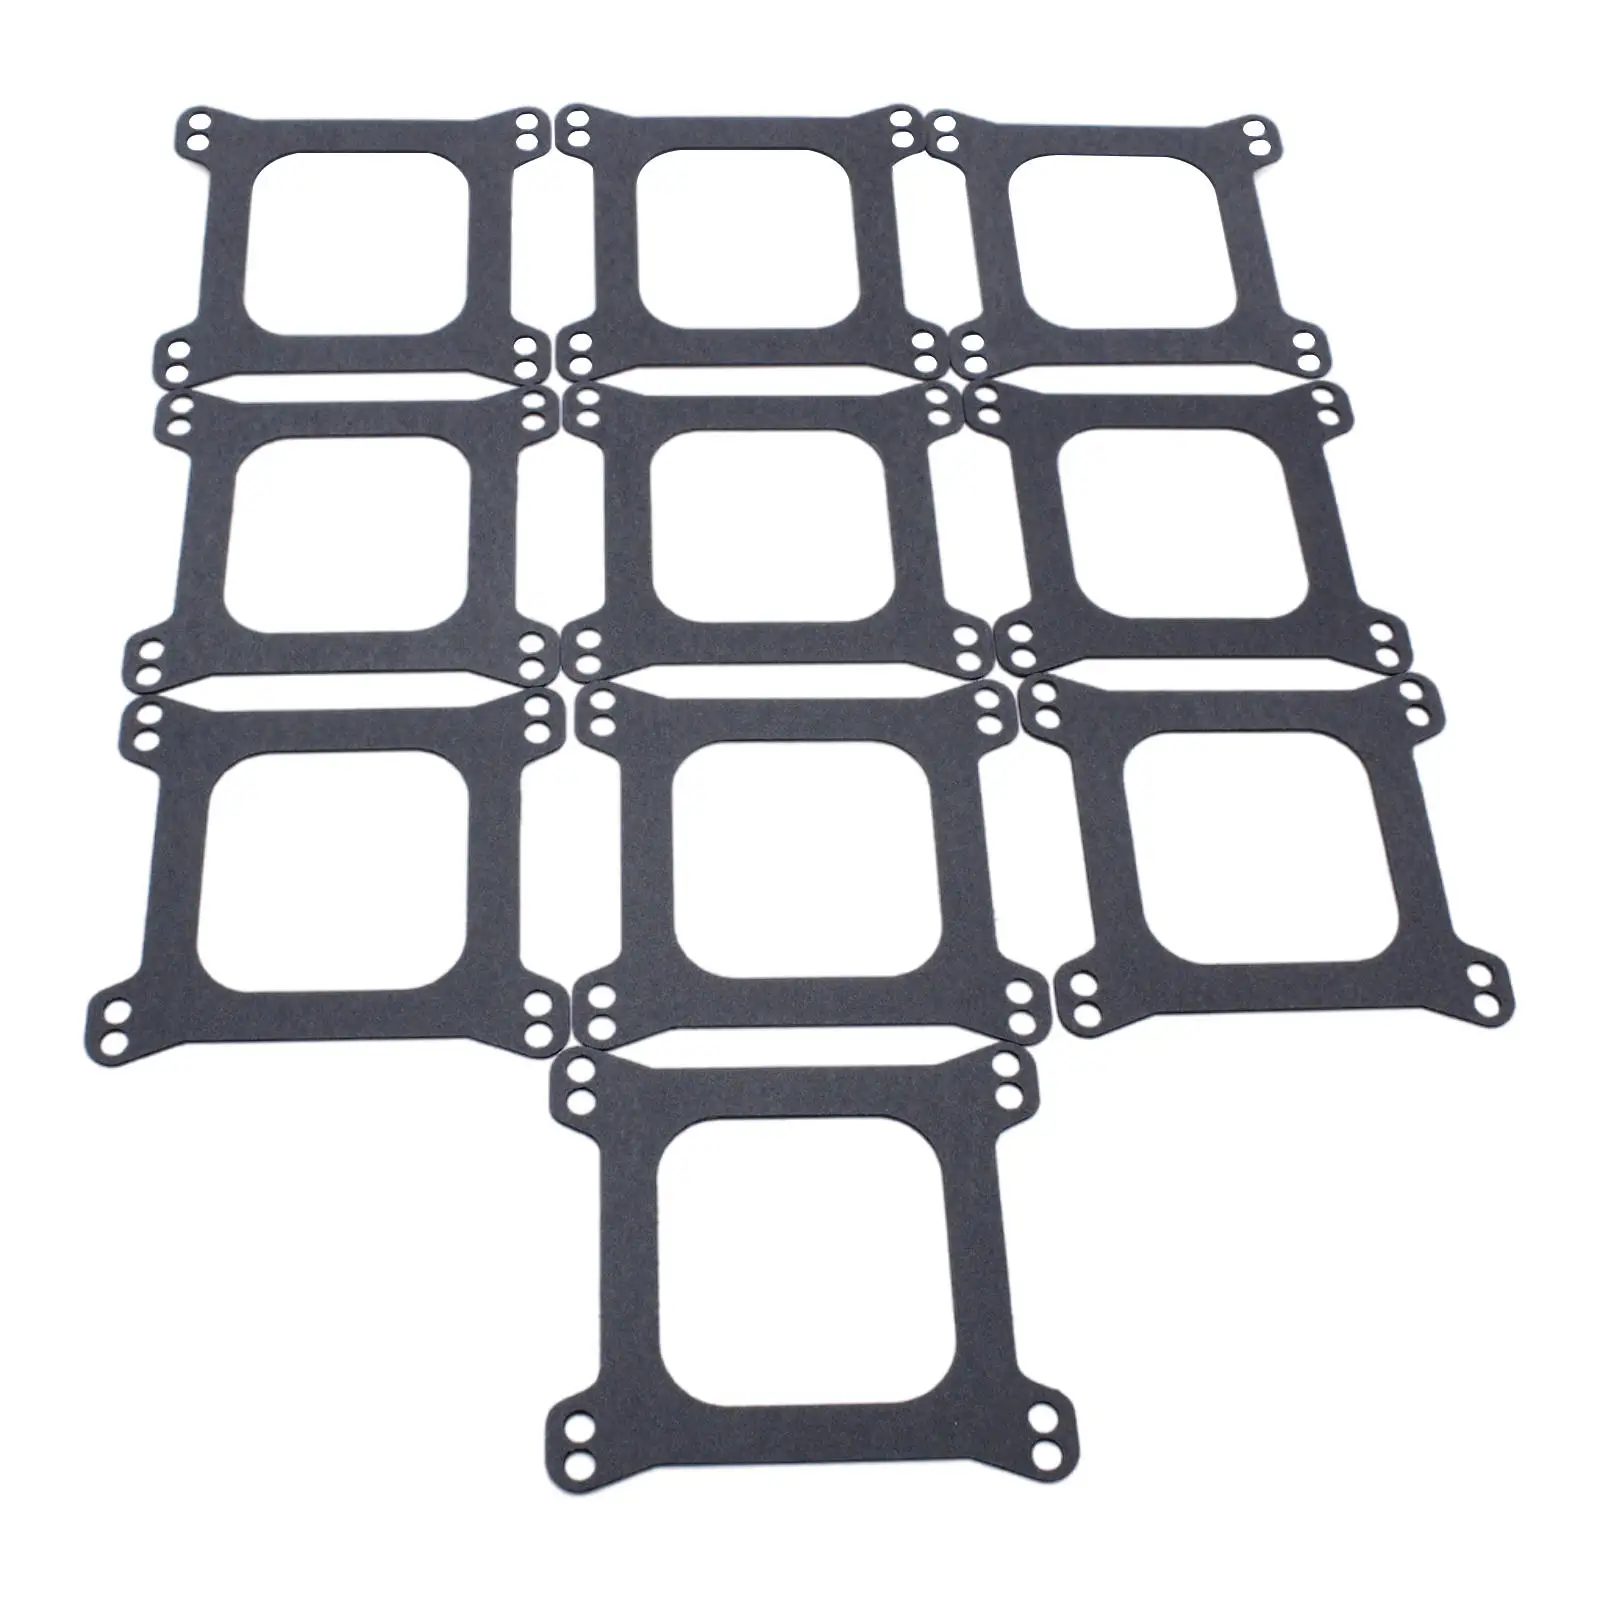 10 Pieces Carburetor Gasket Kit 2033 Square Bore High Temperature Base Gaskets for Barry Grant